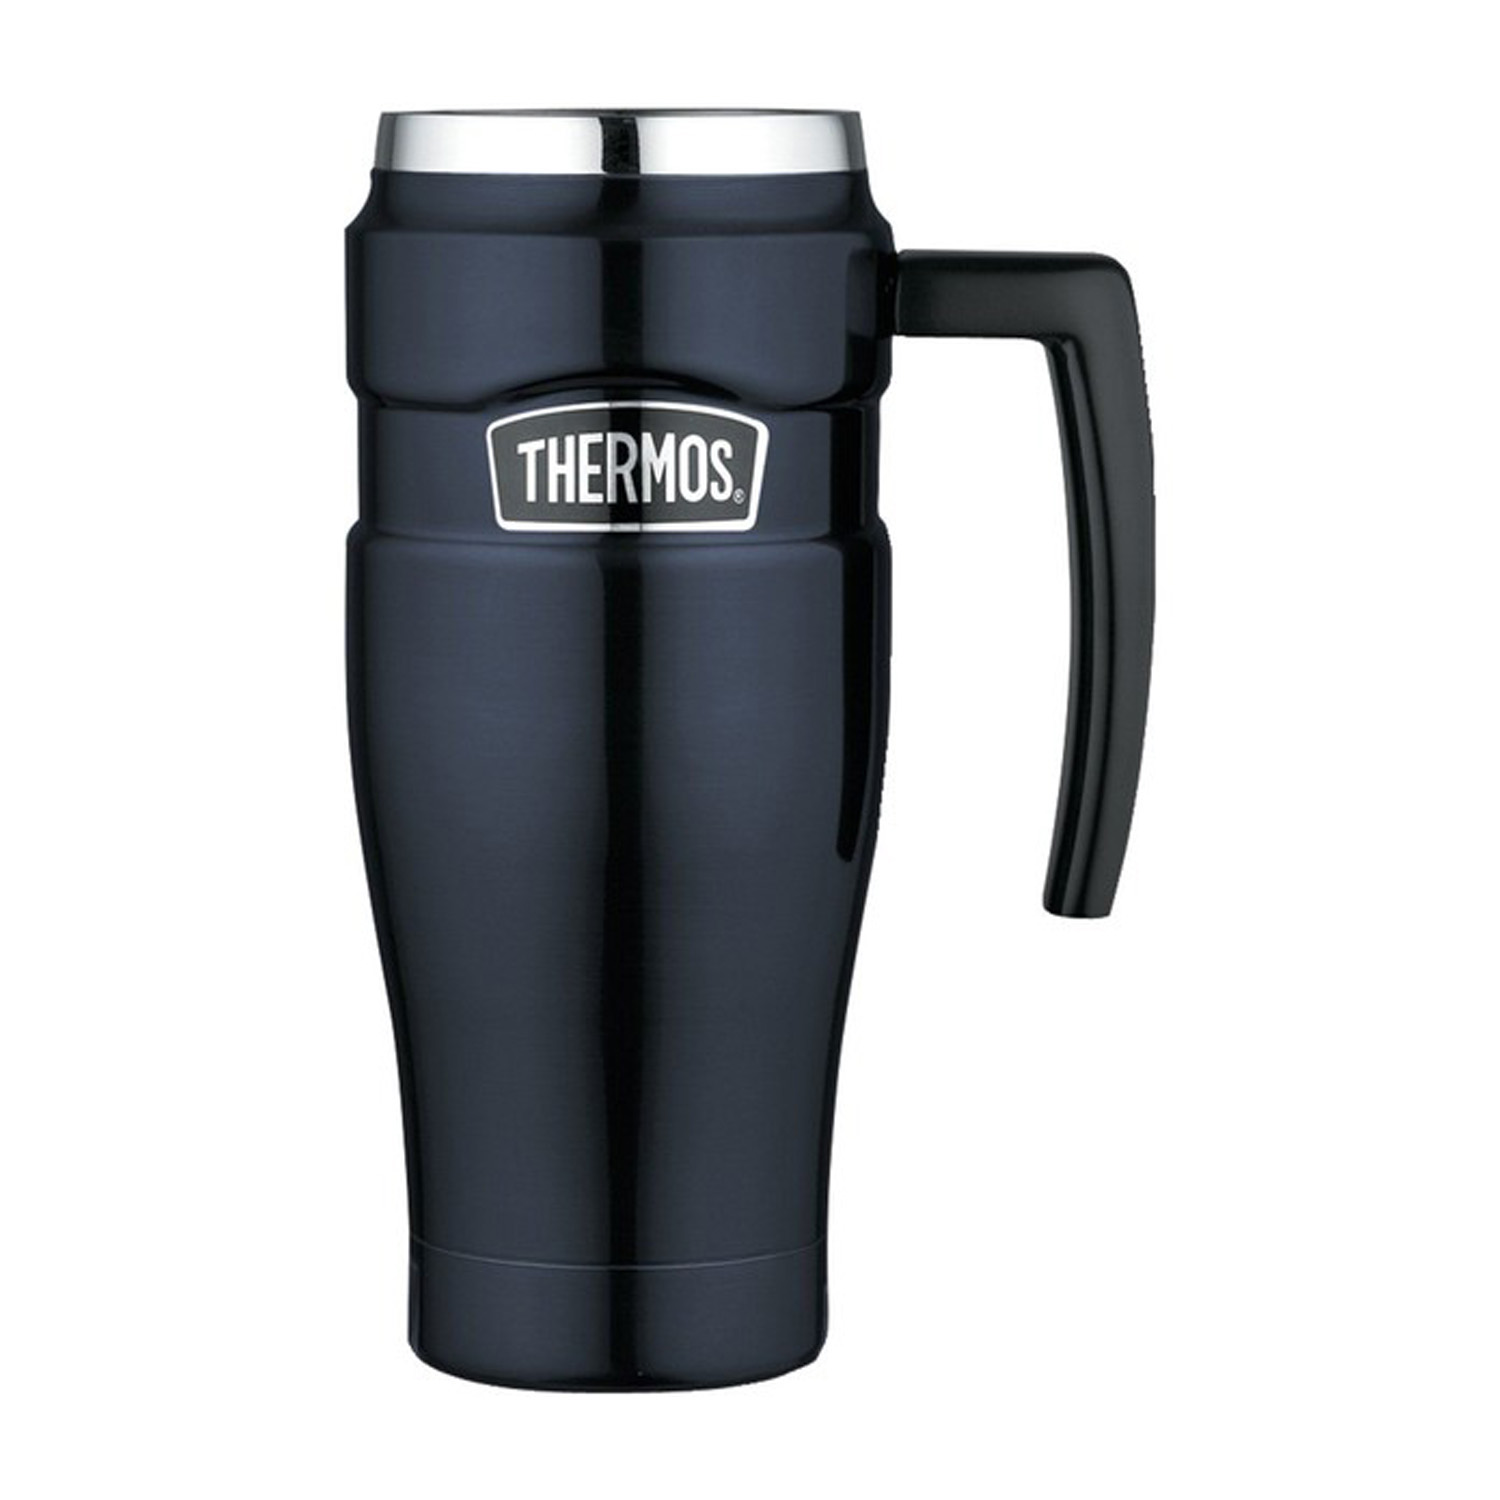 THERMOS STAİNLESS KİNG HANDLE 0.47 LT. - MULTİ - 1